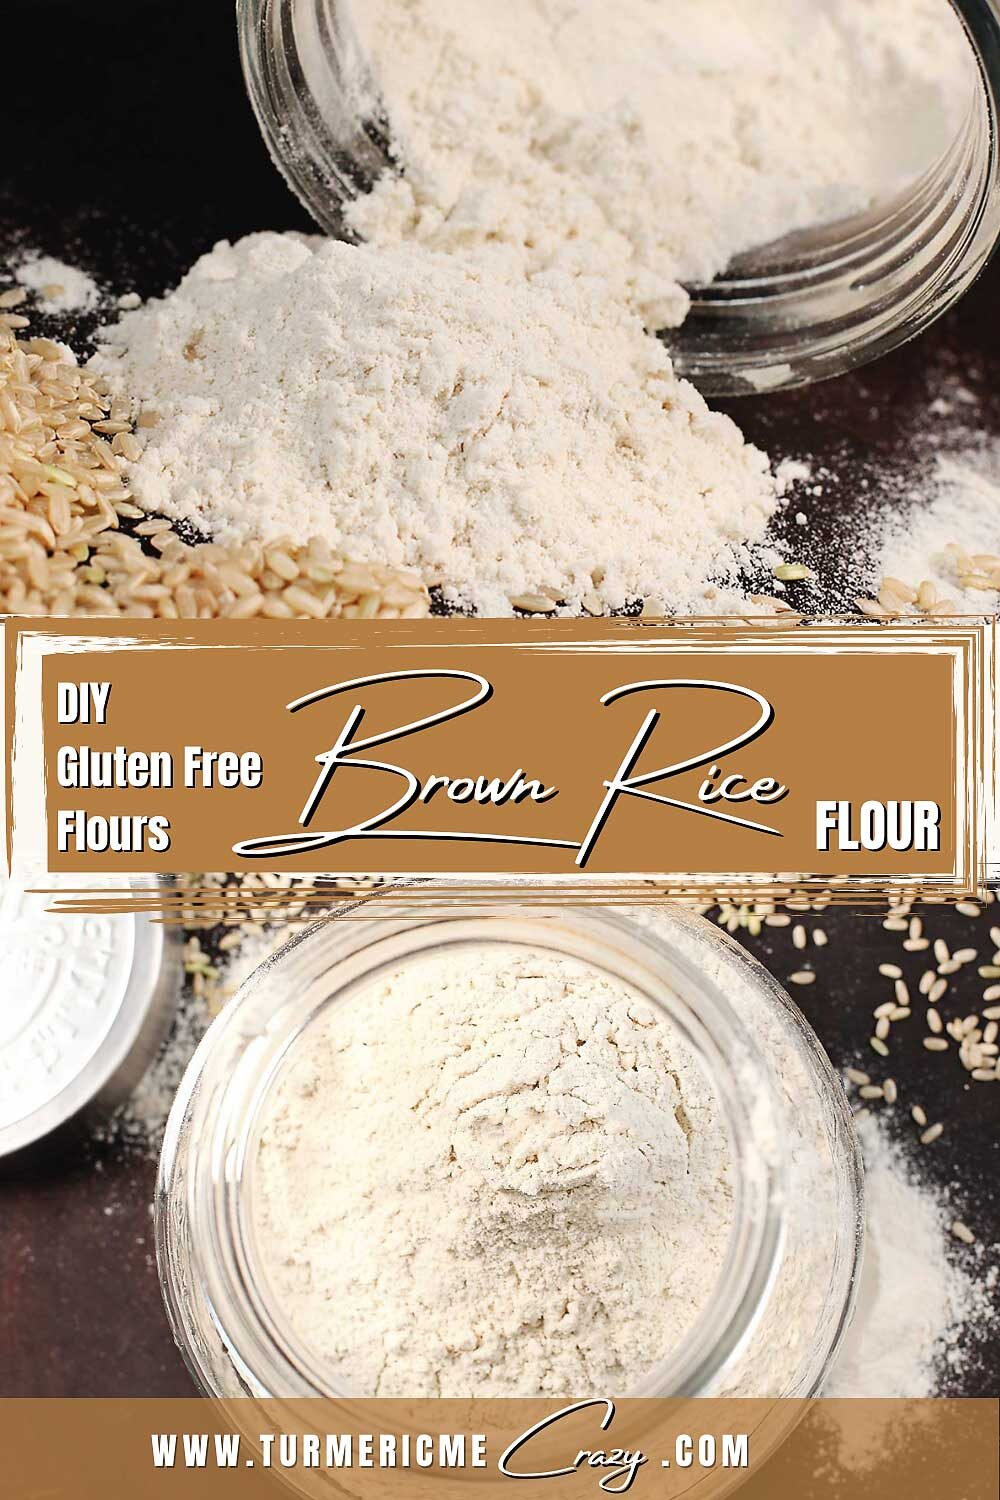 Easily make your own Gluten Free Flours! Soft & fluffy DIY brown rice flour in 3 simple steps to use in all of your gluten free baking! gluten free flours, brown rice flour, how to make your own flour, grind your own flour, blender flours